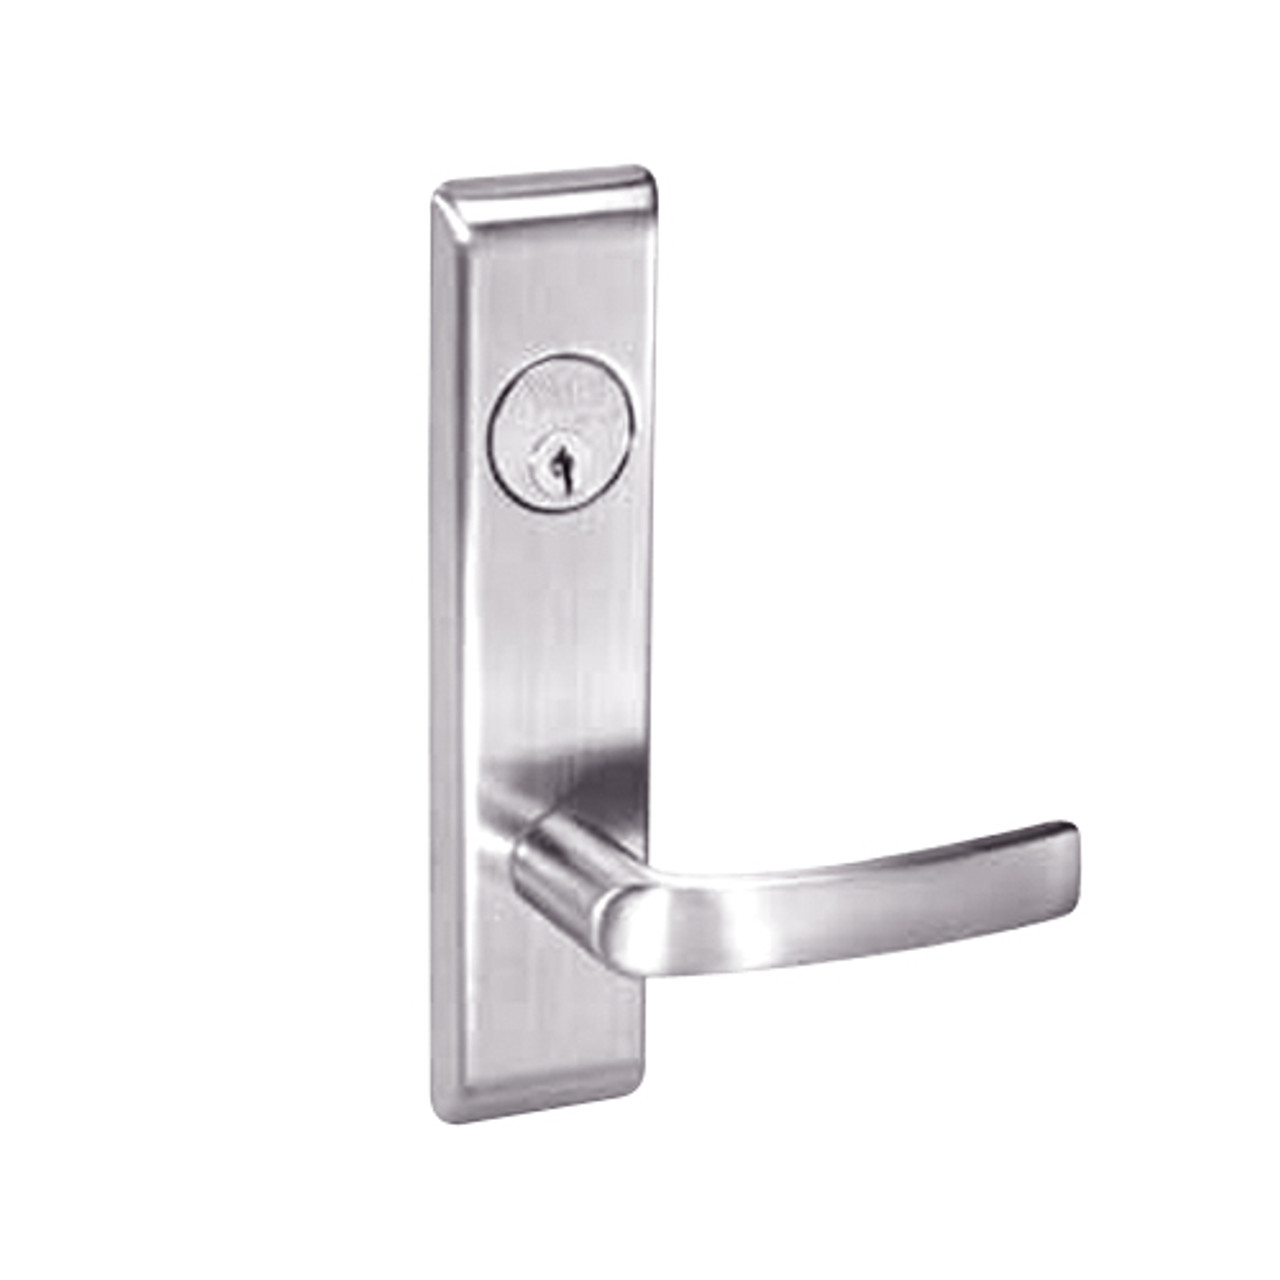 MOCN8809FL-629 Yale 8800FL Series Single Cylinder Mortise Classroom w/ Thumbturn Locks with Monroe Lever in Bright Stainless Steel